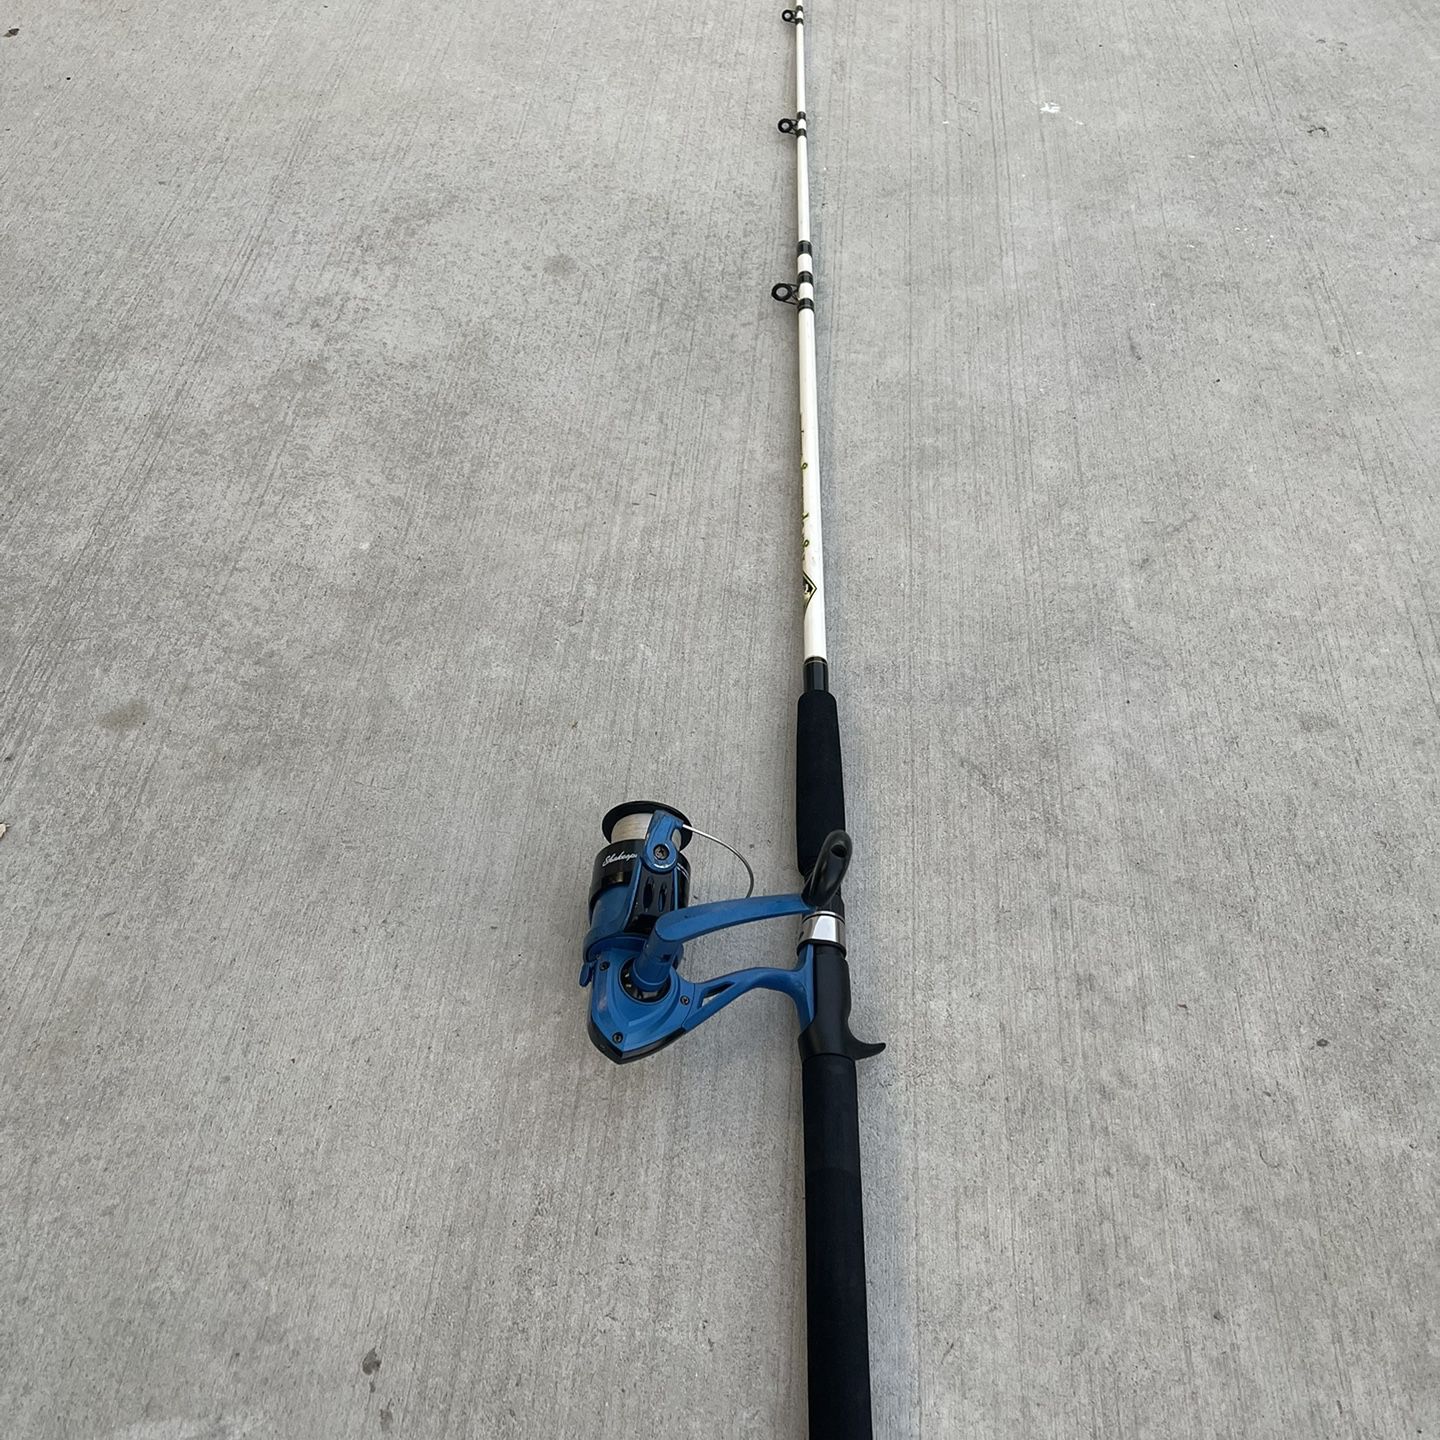 Shakespeare Tiger TGRA50 Spinning Reel On Shakespeare Tiger 6'6” Rod for  Sale in Plant City, FL - OfferUp